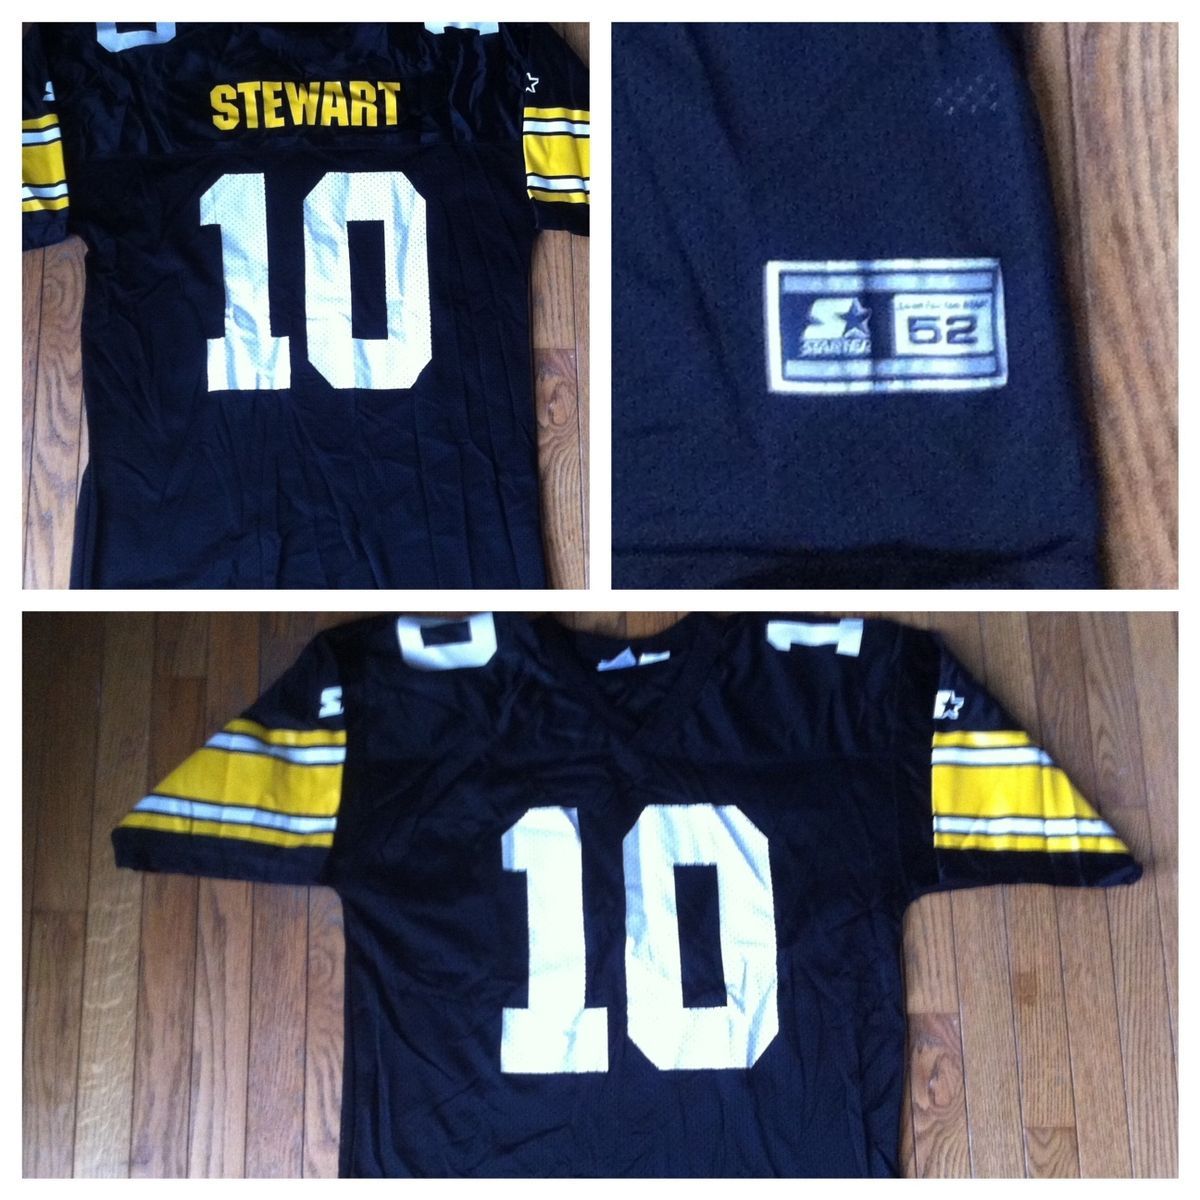 Kordell Stewart Pittsburgh Steelers Classic Throwback NFL Jersey